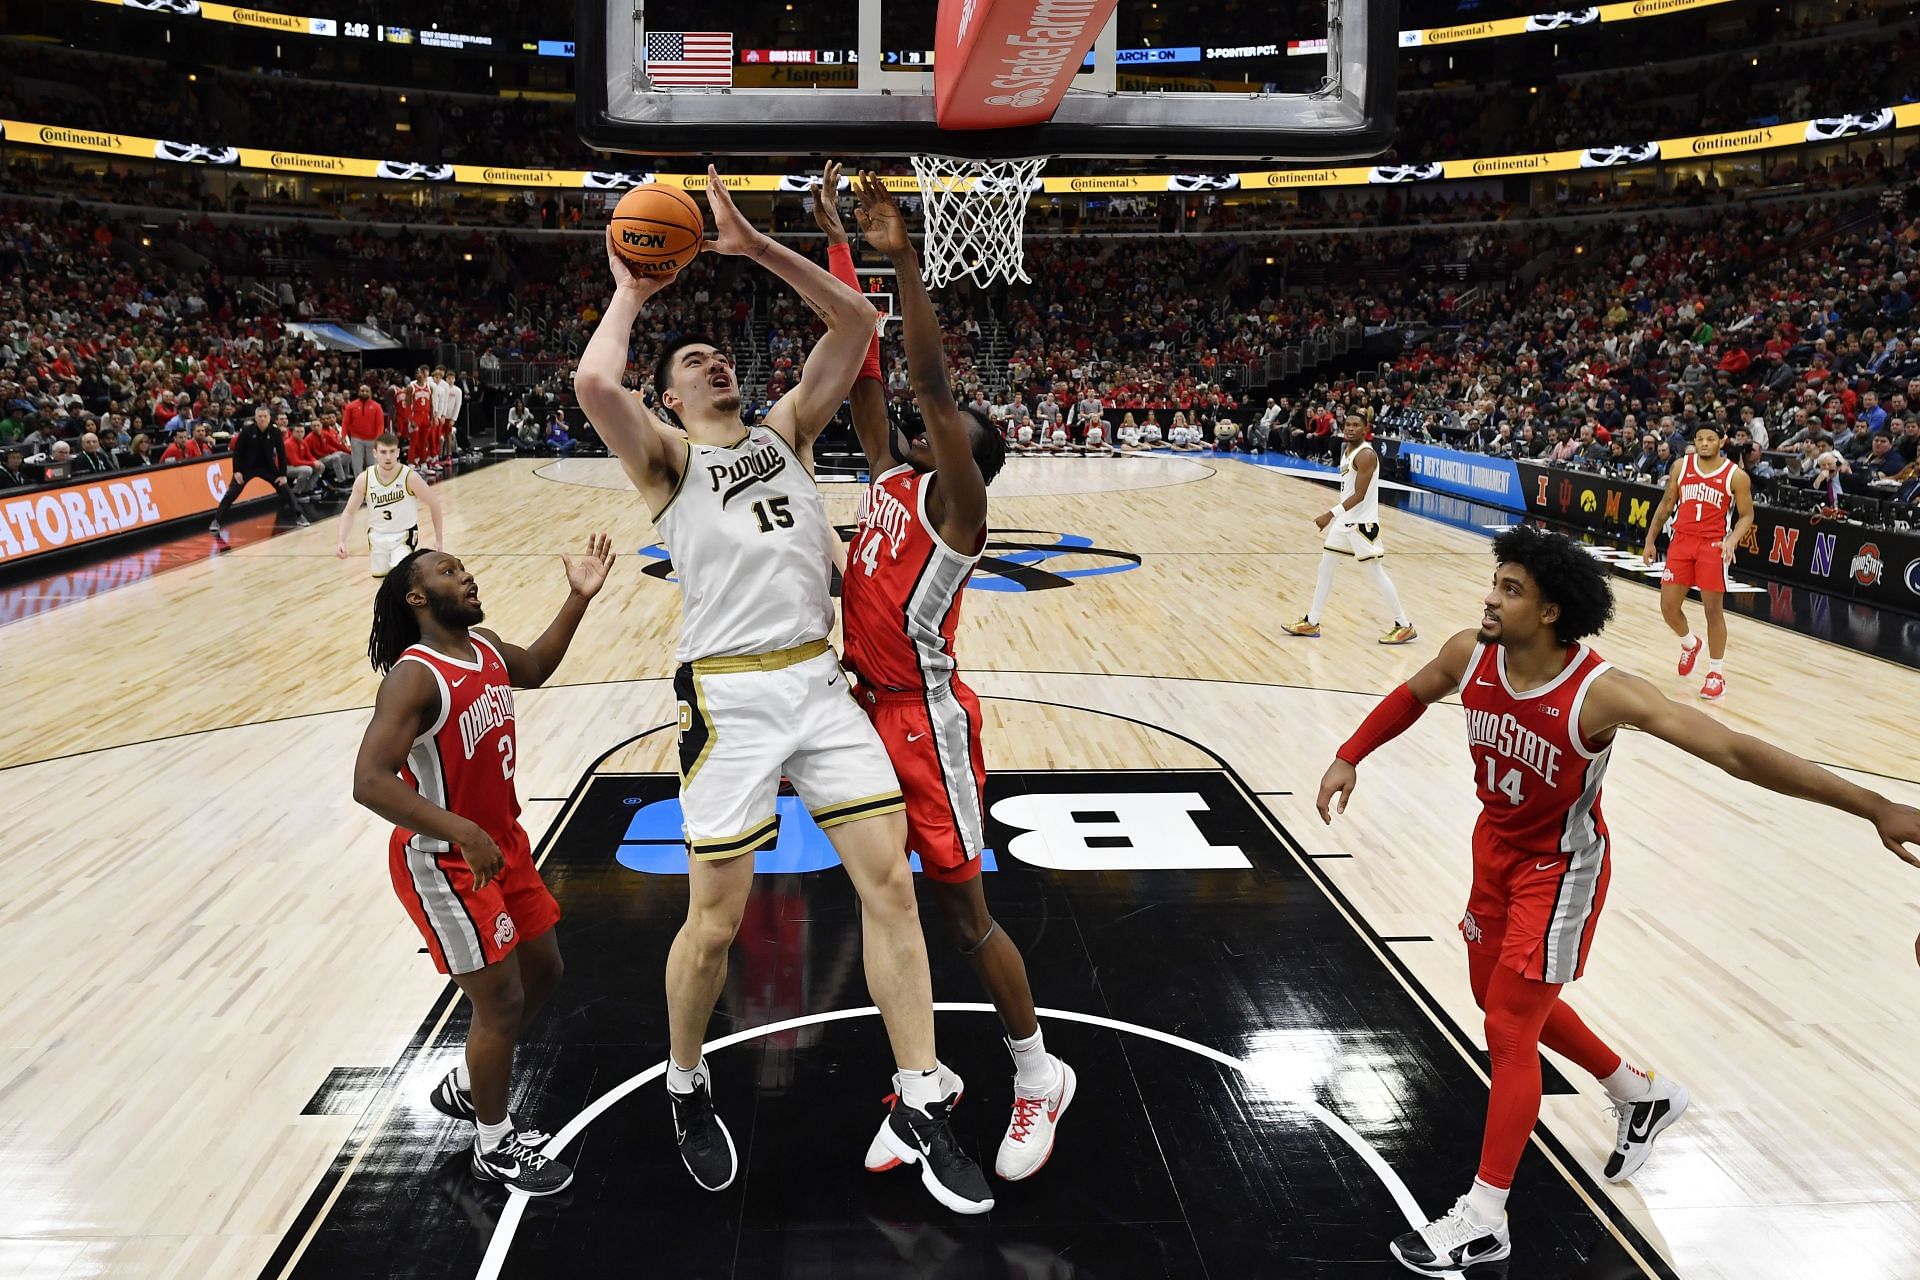 Purdue defeated the Buckeyes in the Big Ten tournament. (Image via Getty Images)